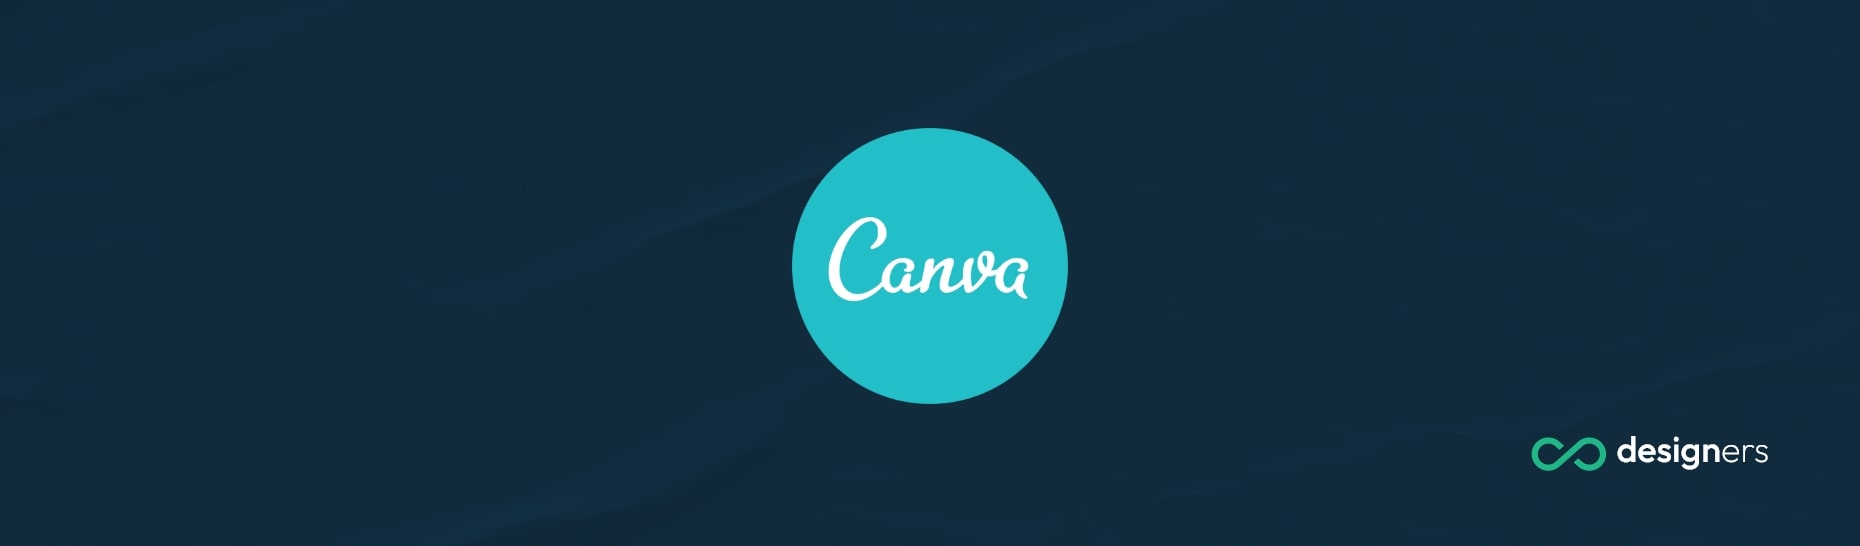 Does Canva Have a Timer?